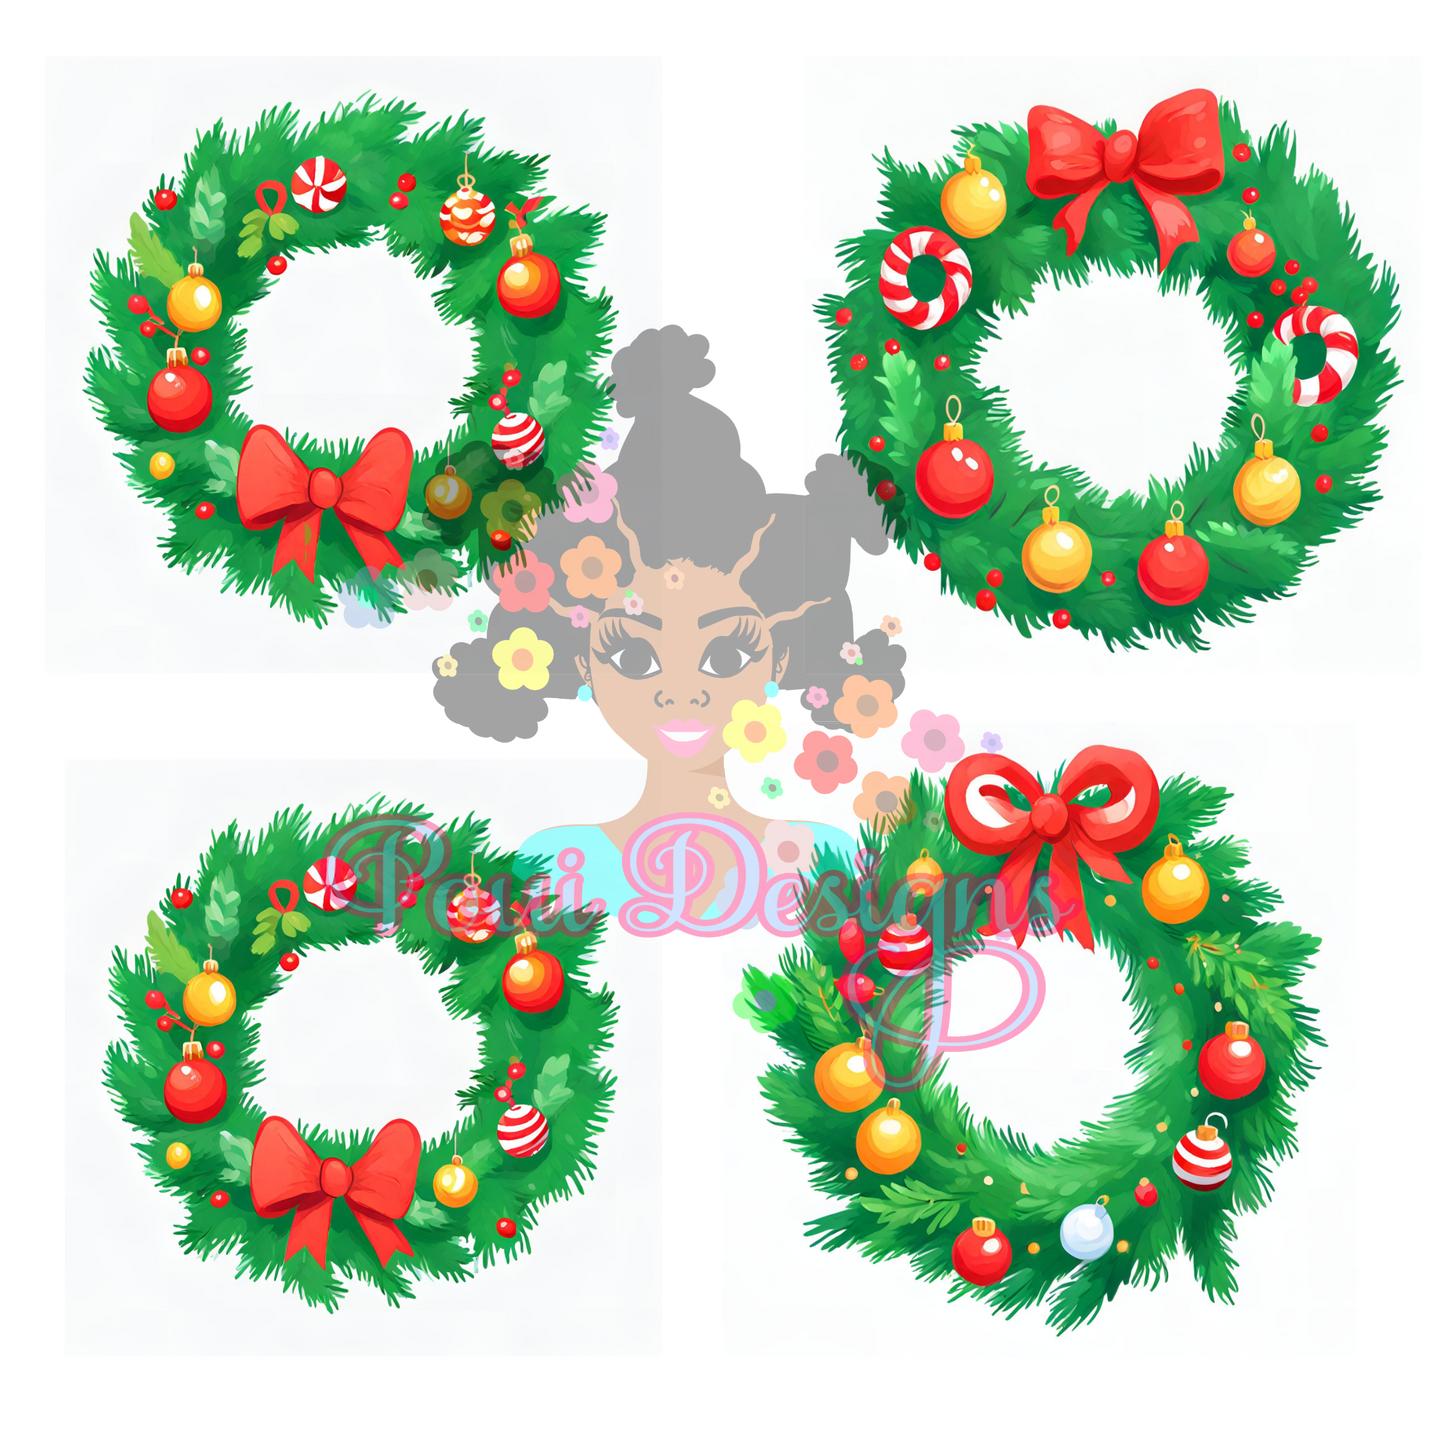 Christmas Cartoon Wreaths for kids,adults,scapbooking